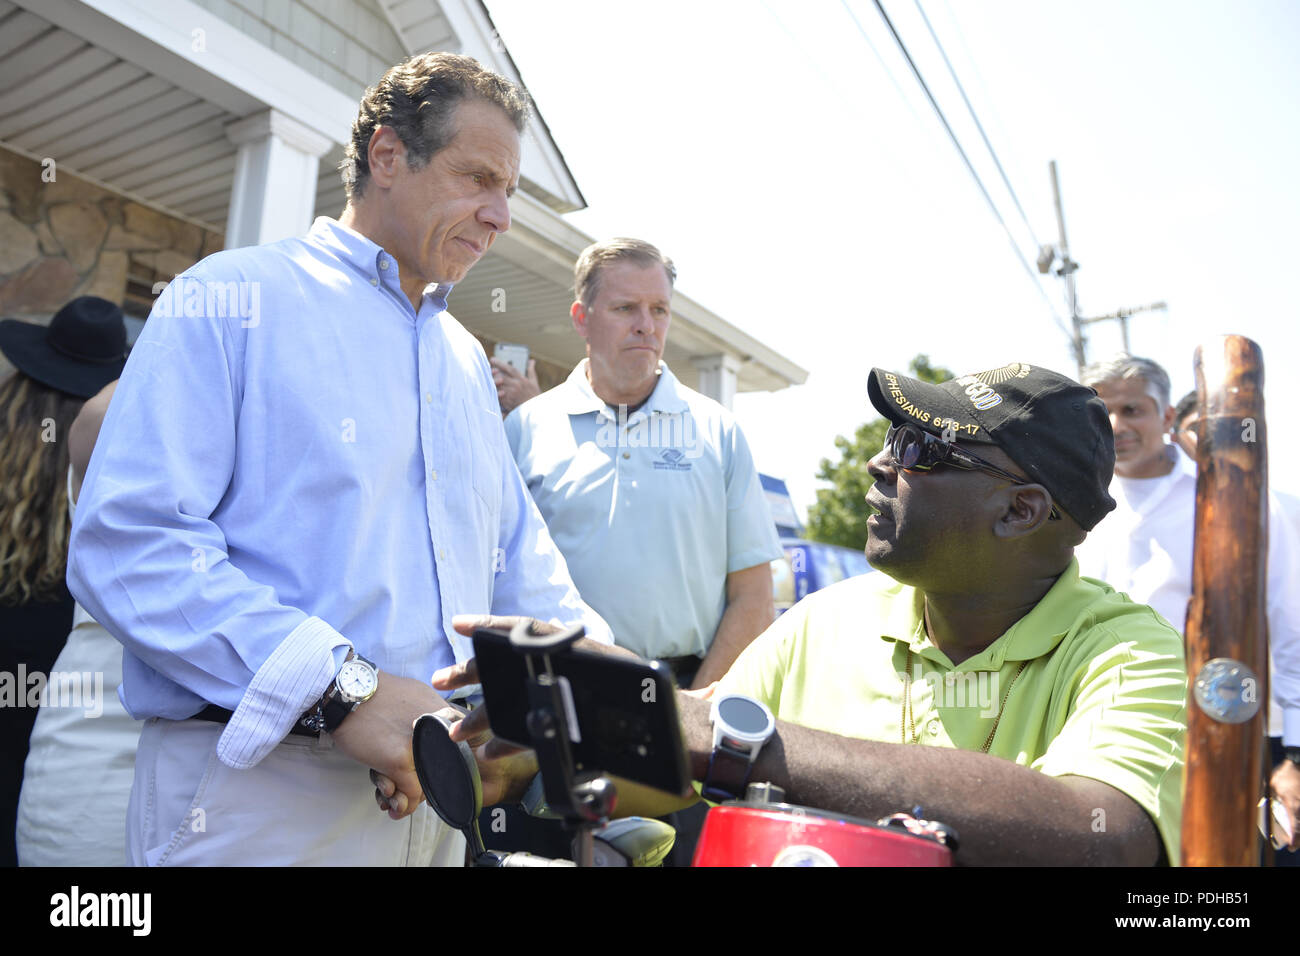 Massapequa, New York, USA. 5th Aug, 2018. Gov. ANDREW CUOMO, running for re-election, speaks with disabled man asking for government action helping the handicapped. The governor was a special guest at opening of joint campaign office for Grechen Shirley and NY Sen. J. Brooks, aiming for a Democratic Blue Wave in November midterm elections. Credit: Ann Parry/ZUMA Wire/Alamy Live News Stock Photo